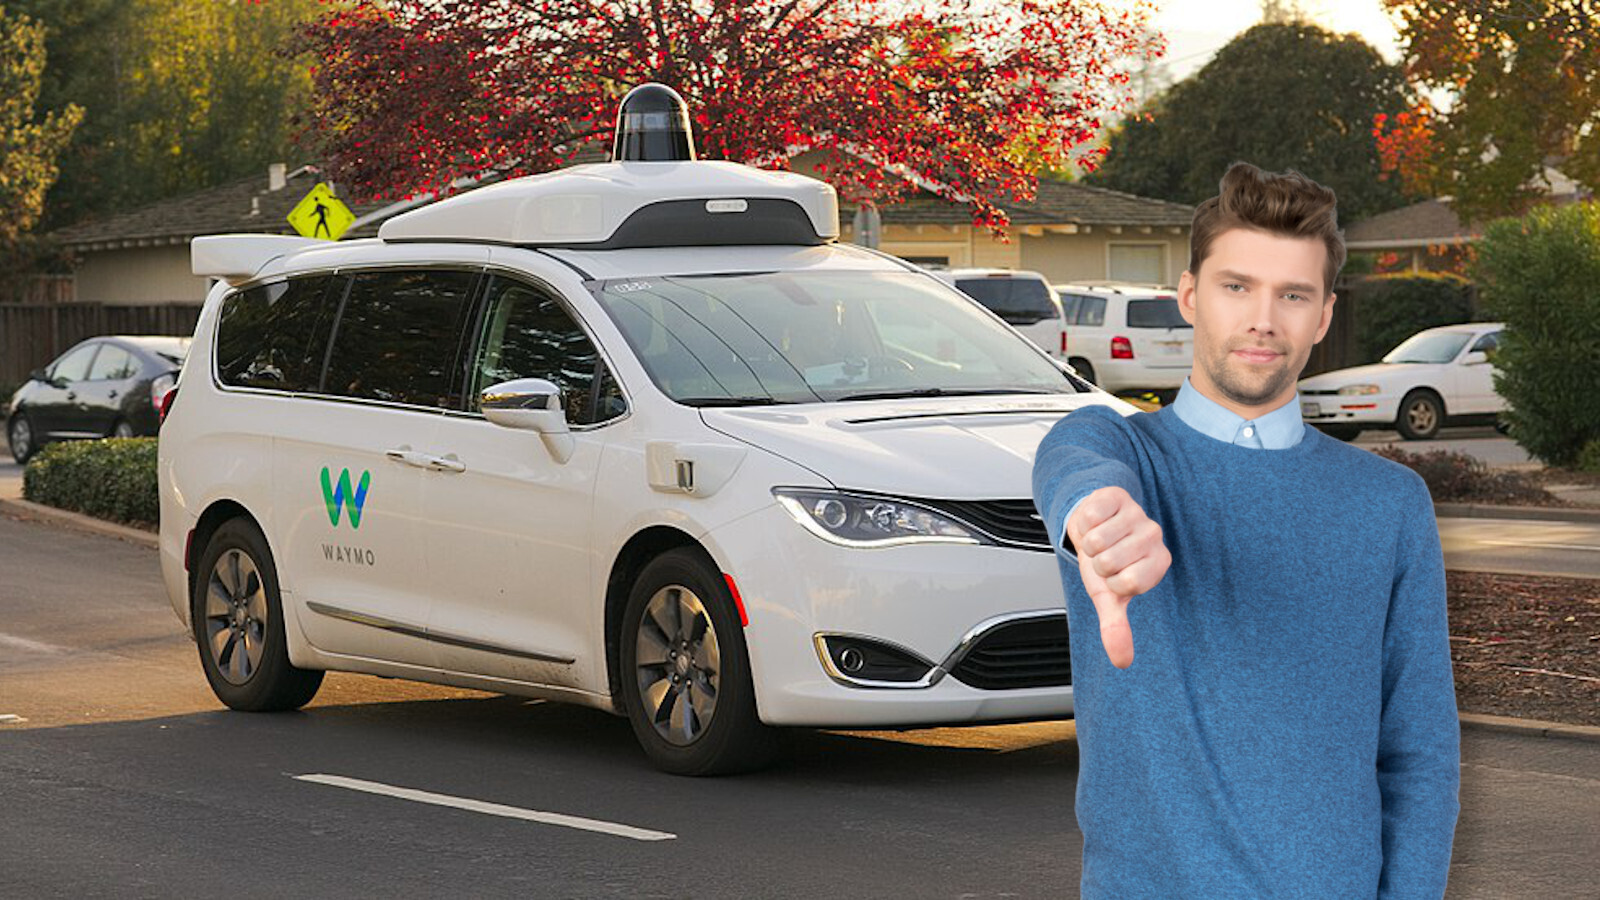 Nearly 90% of Americans don’t trust self-driving cars